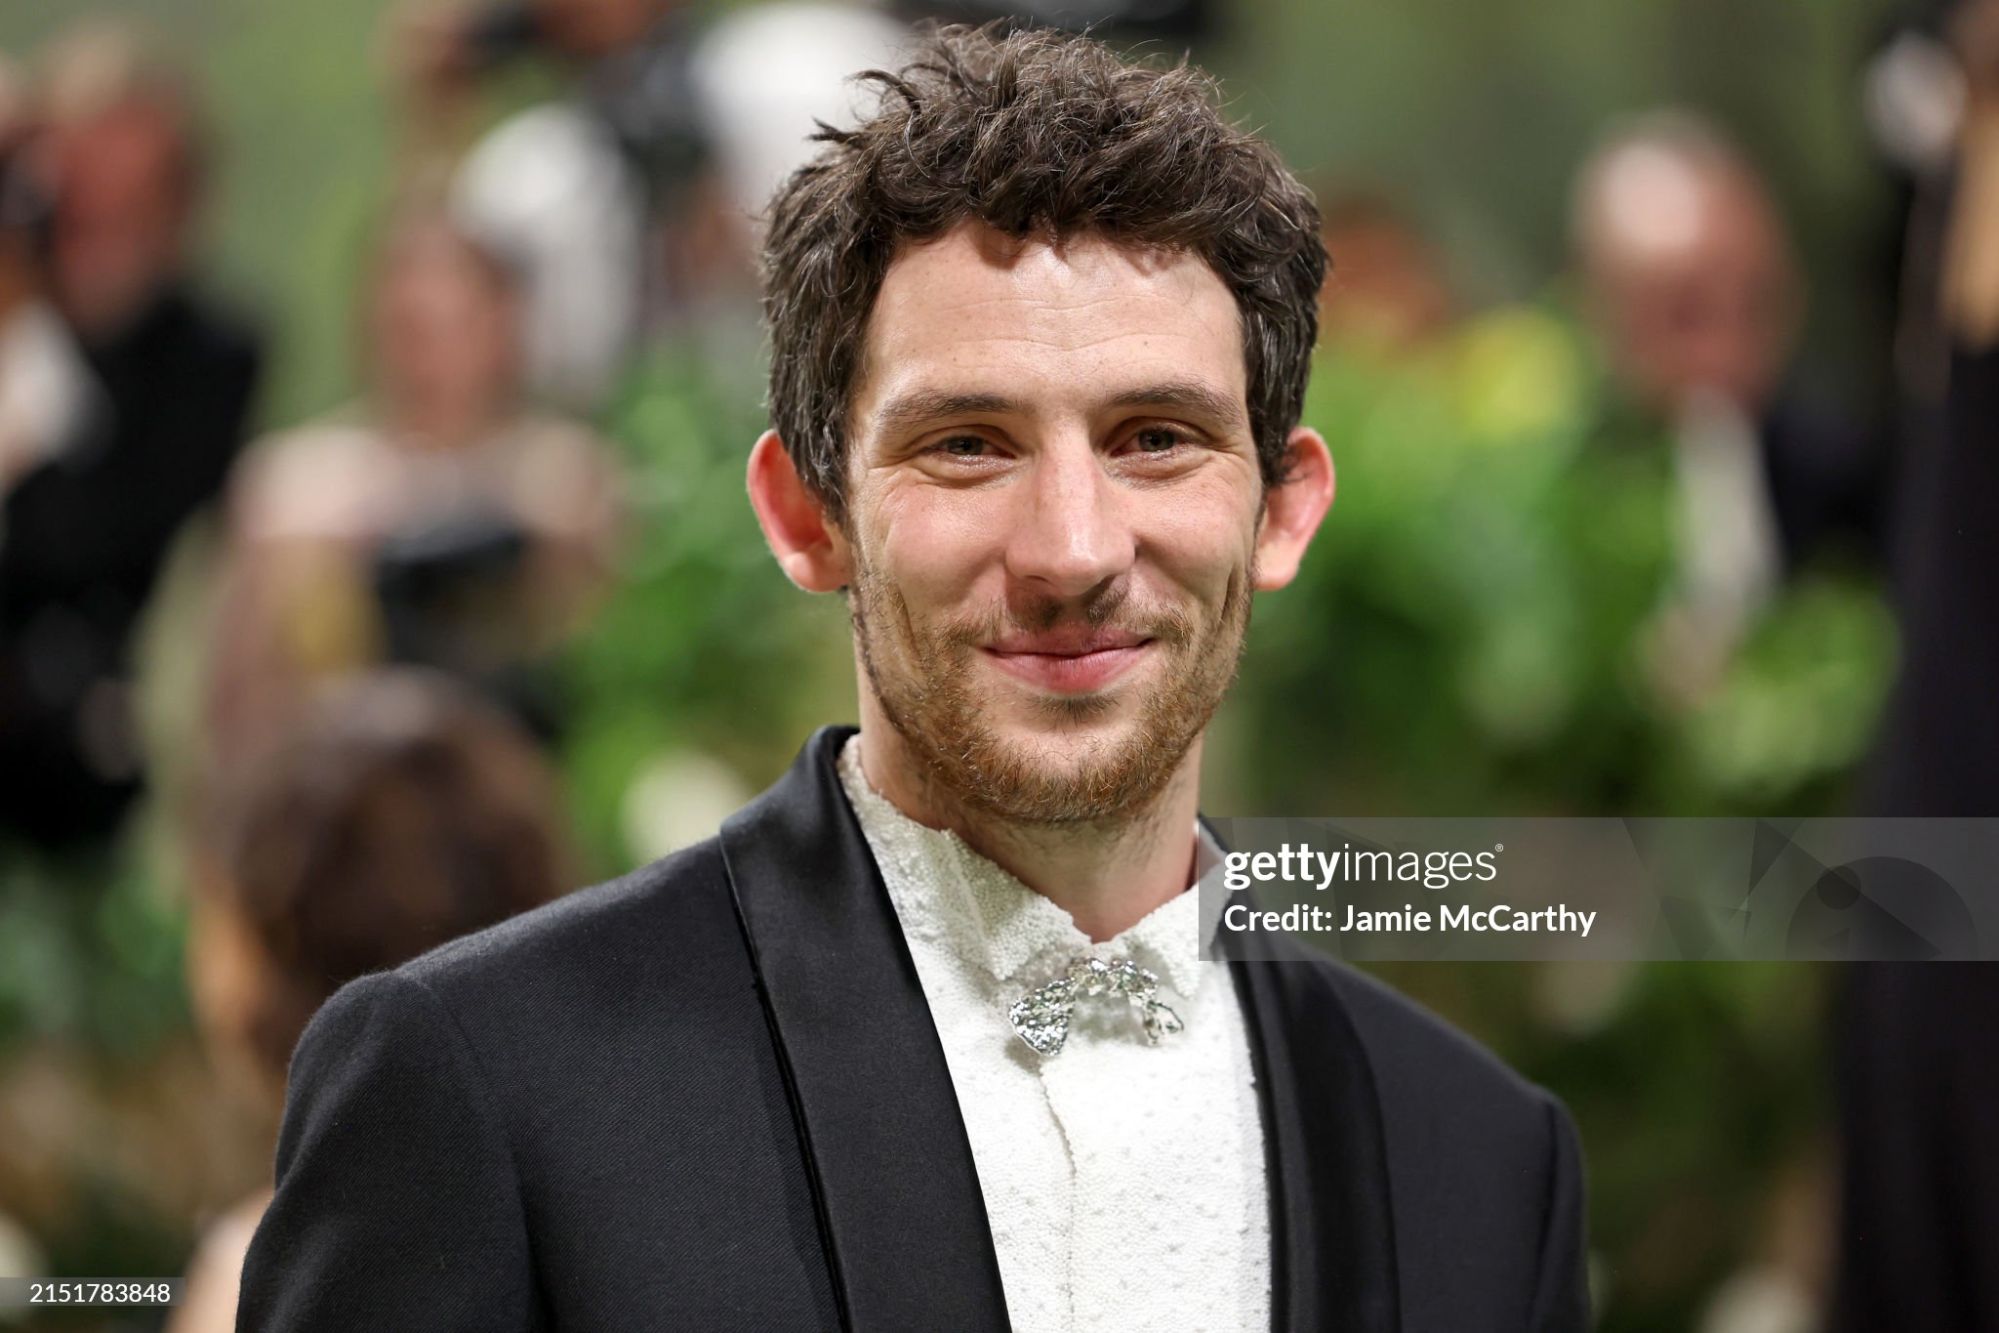 gettyimages-2151783848-2048x2048.jpg